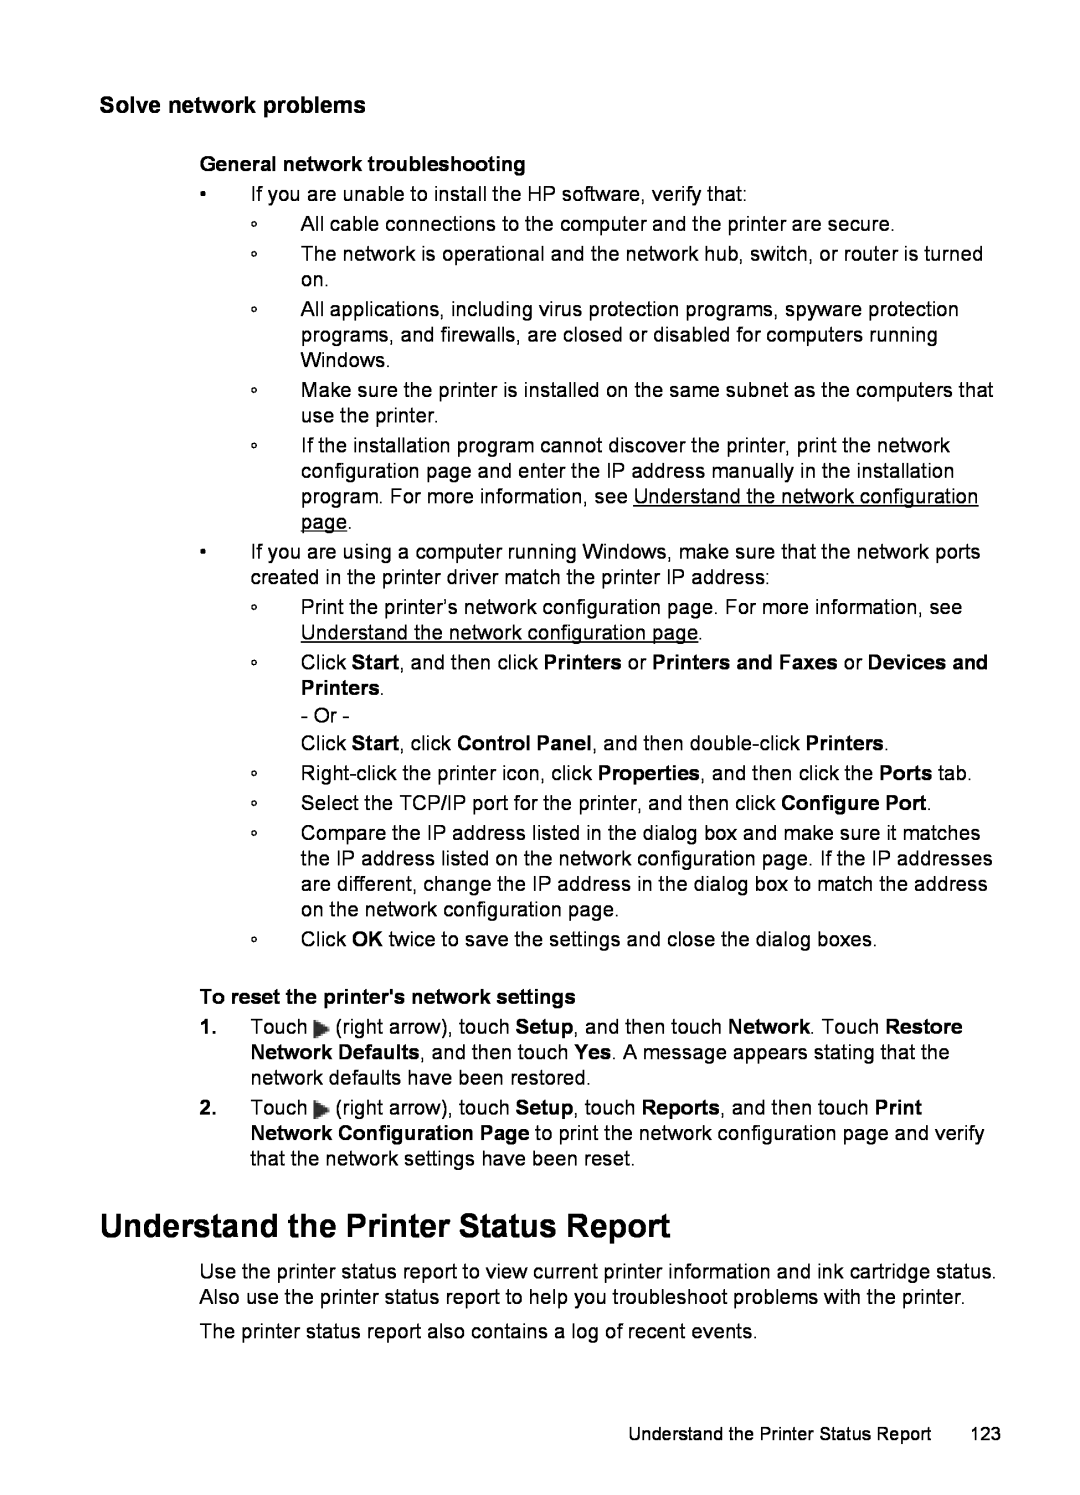 HP 6600 - H7 manual Understand the Printer Status Report, Solve network problems, General network troubleshooting 